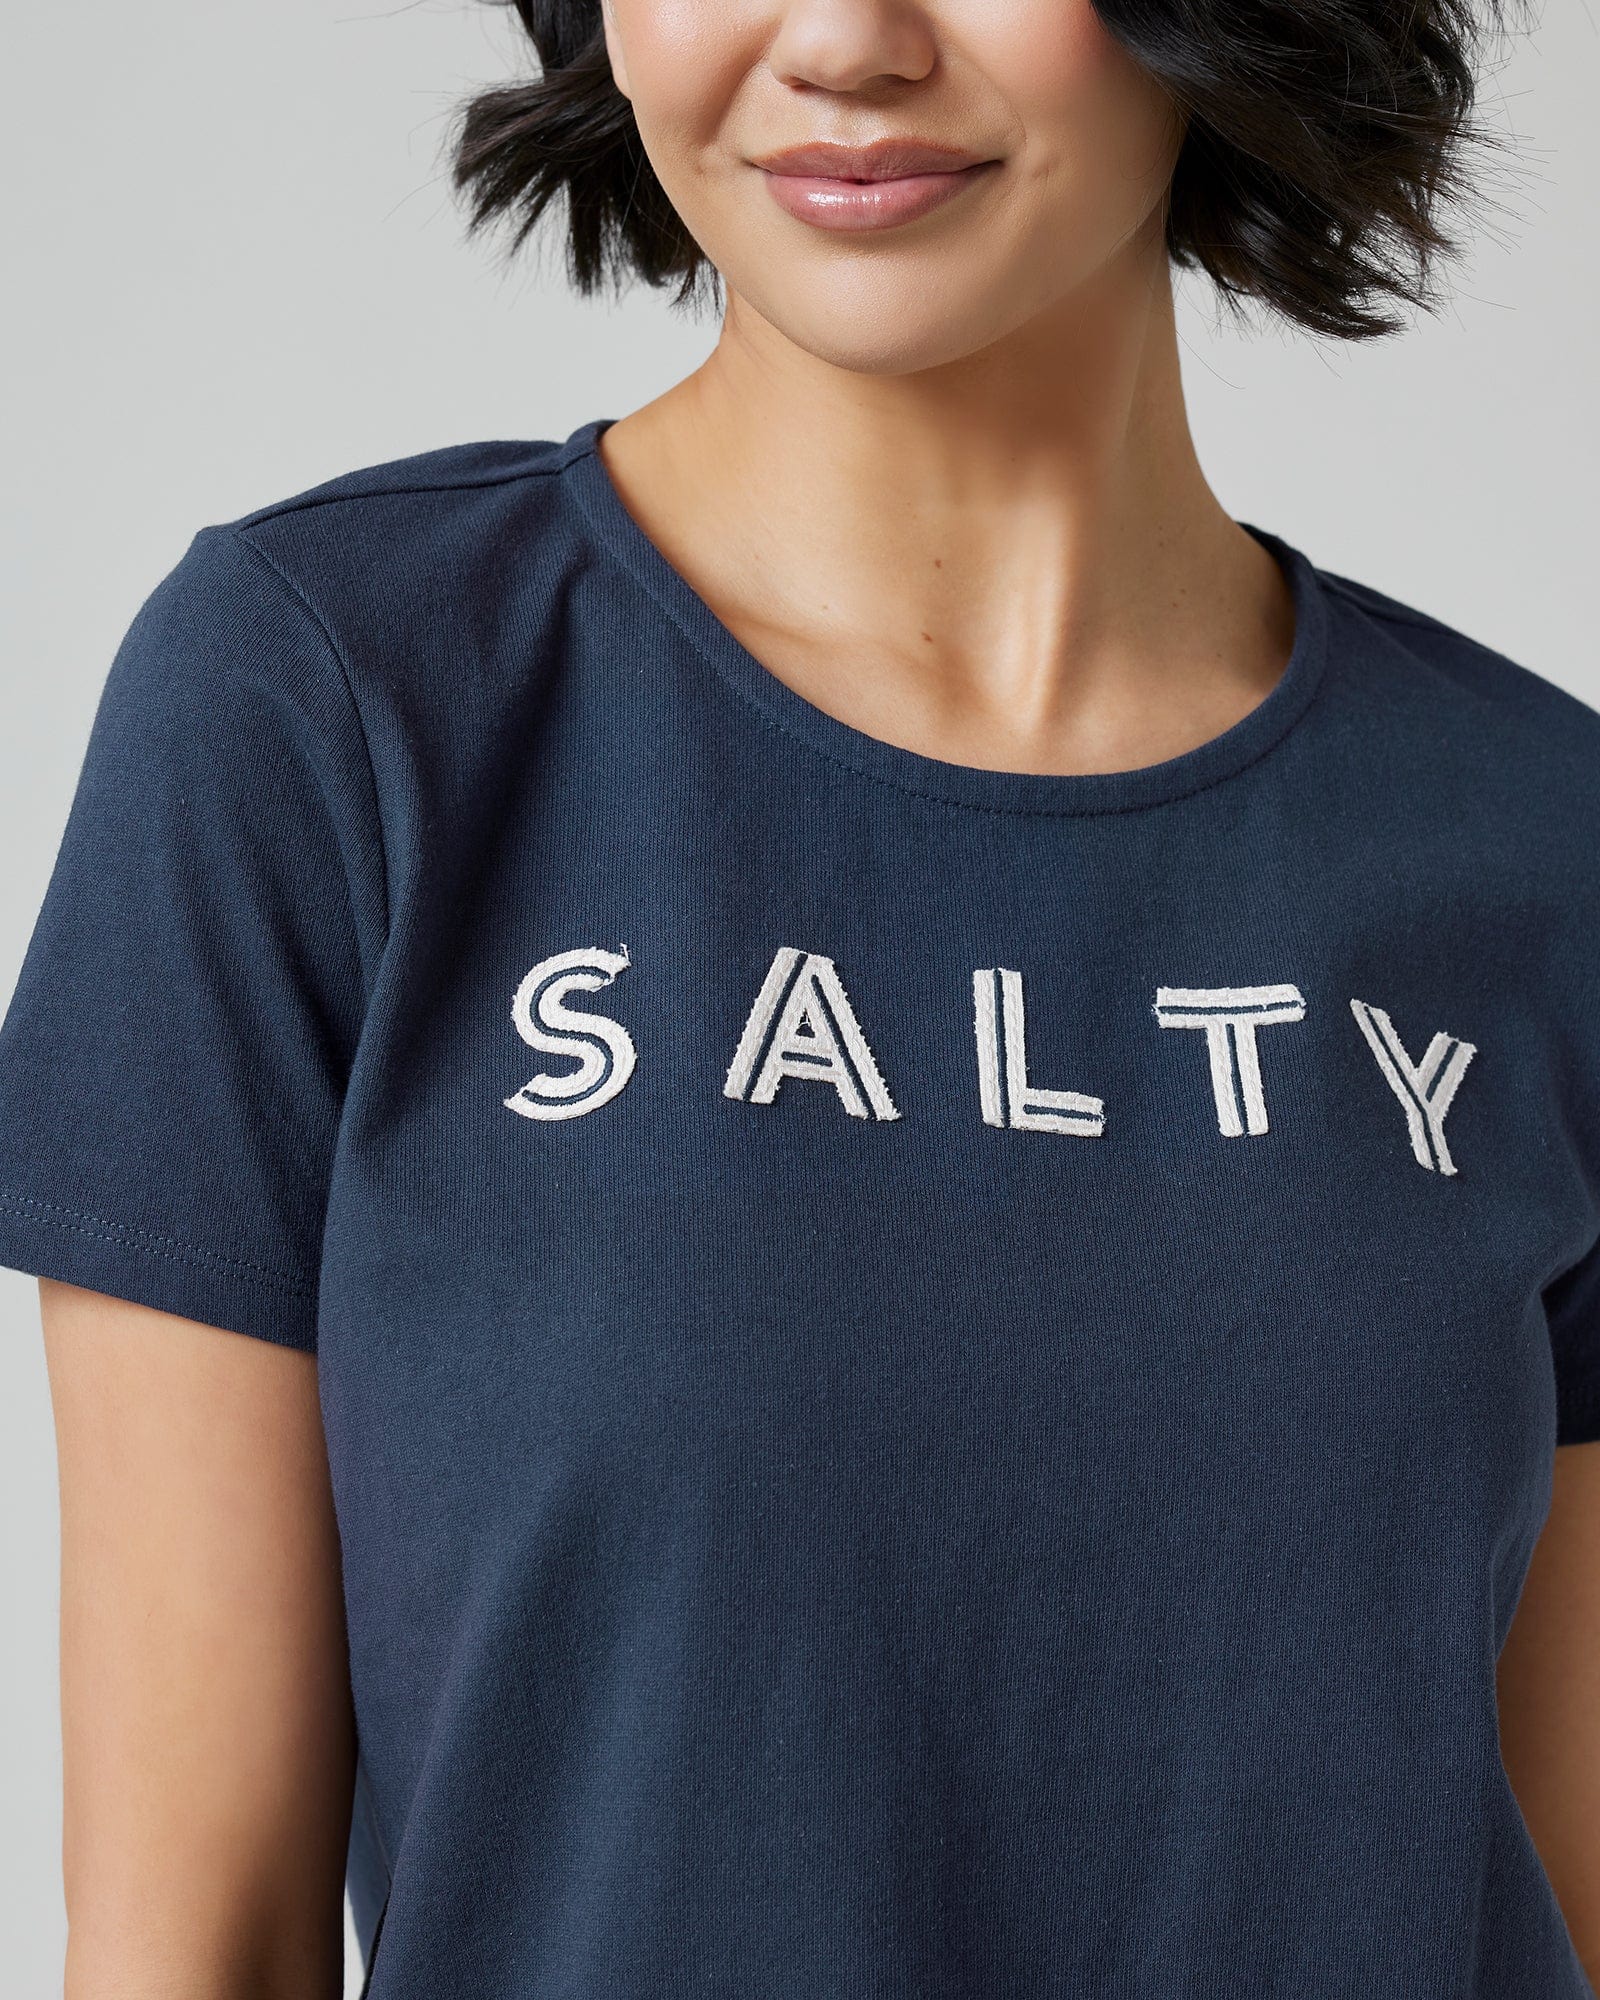 Woman in a navy graphic t-shirt with "SALTY" across the front